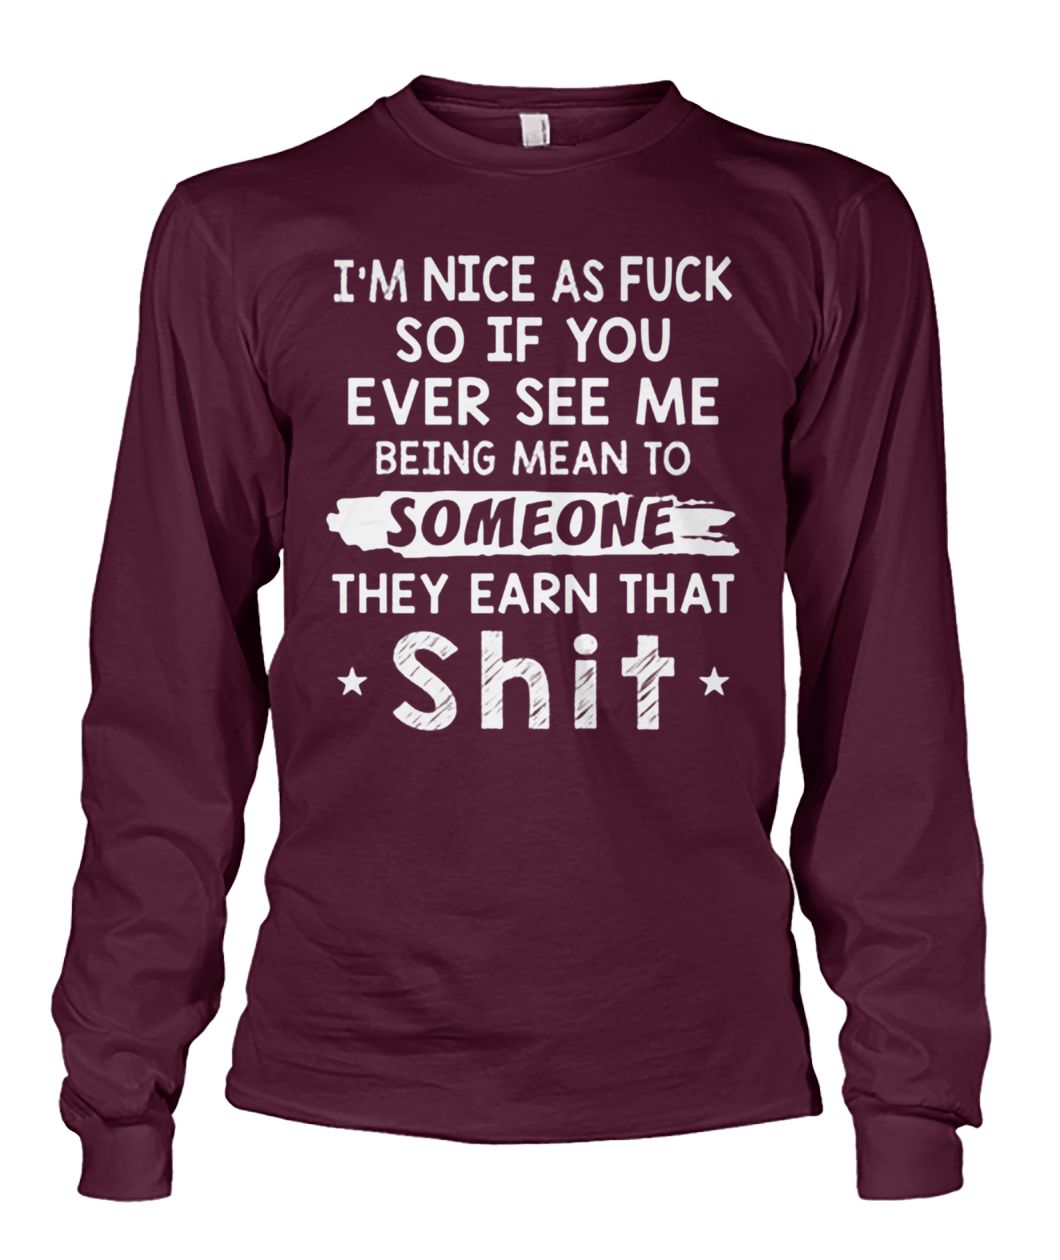 I’m nice as fuck so if you ever see me being mean to someone they earned that shit unisex long sleeve